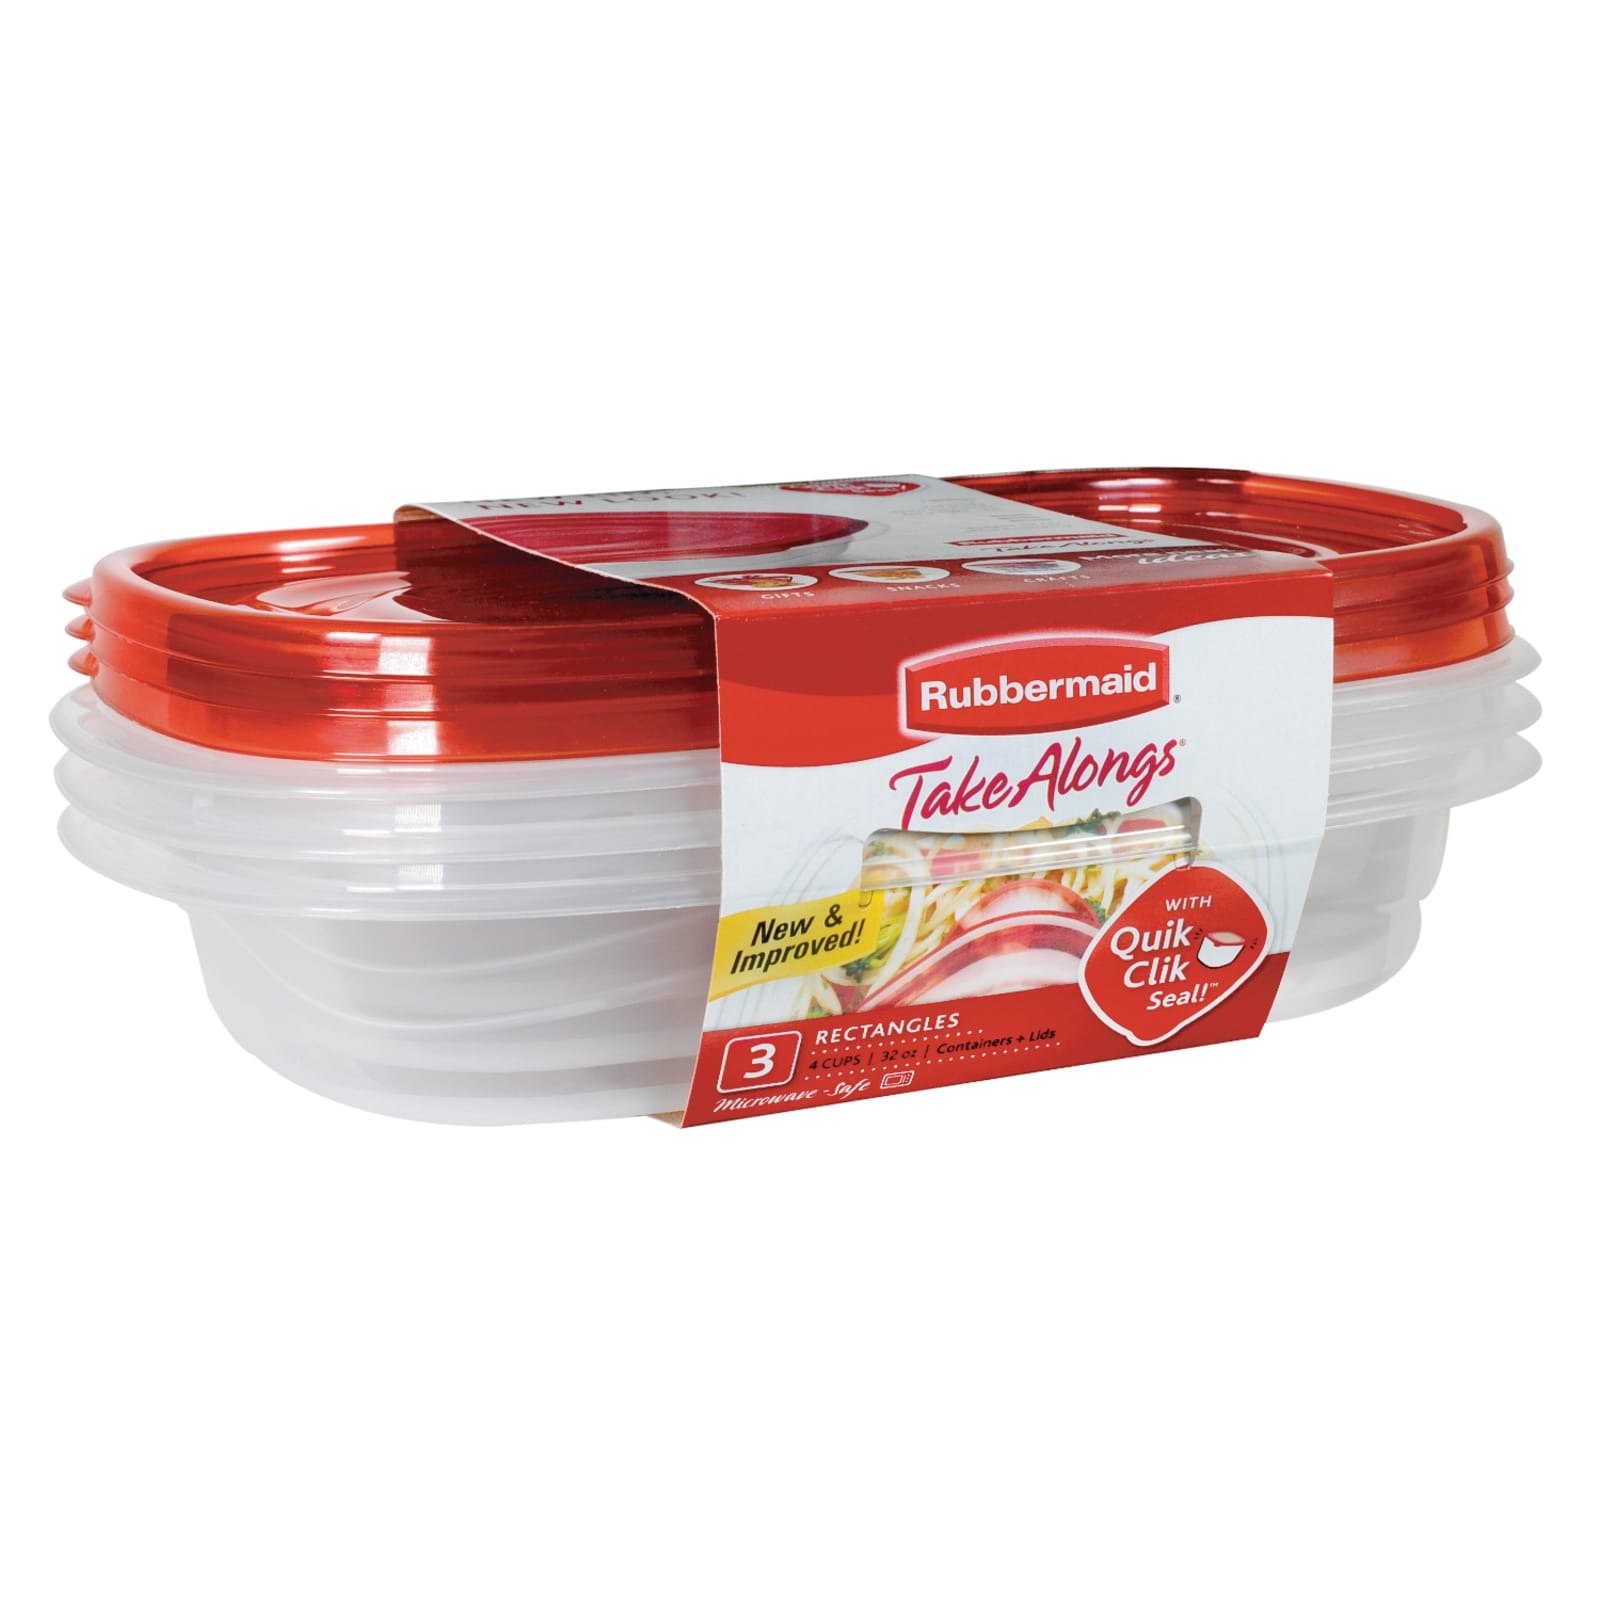 Rubbermaid Take Alongs Containers + Lids Rectangles With Quik Clik